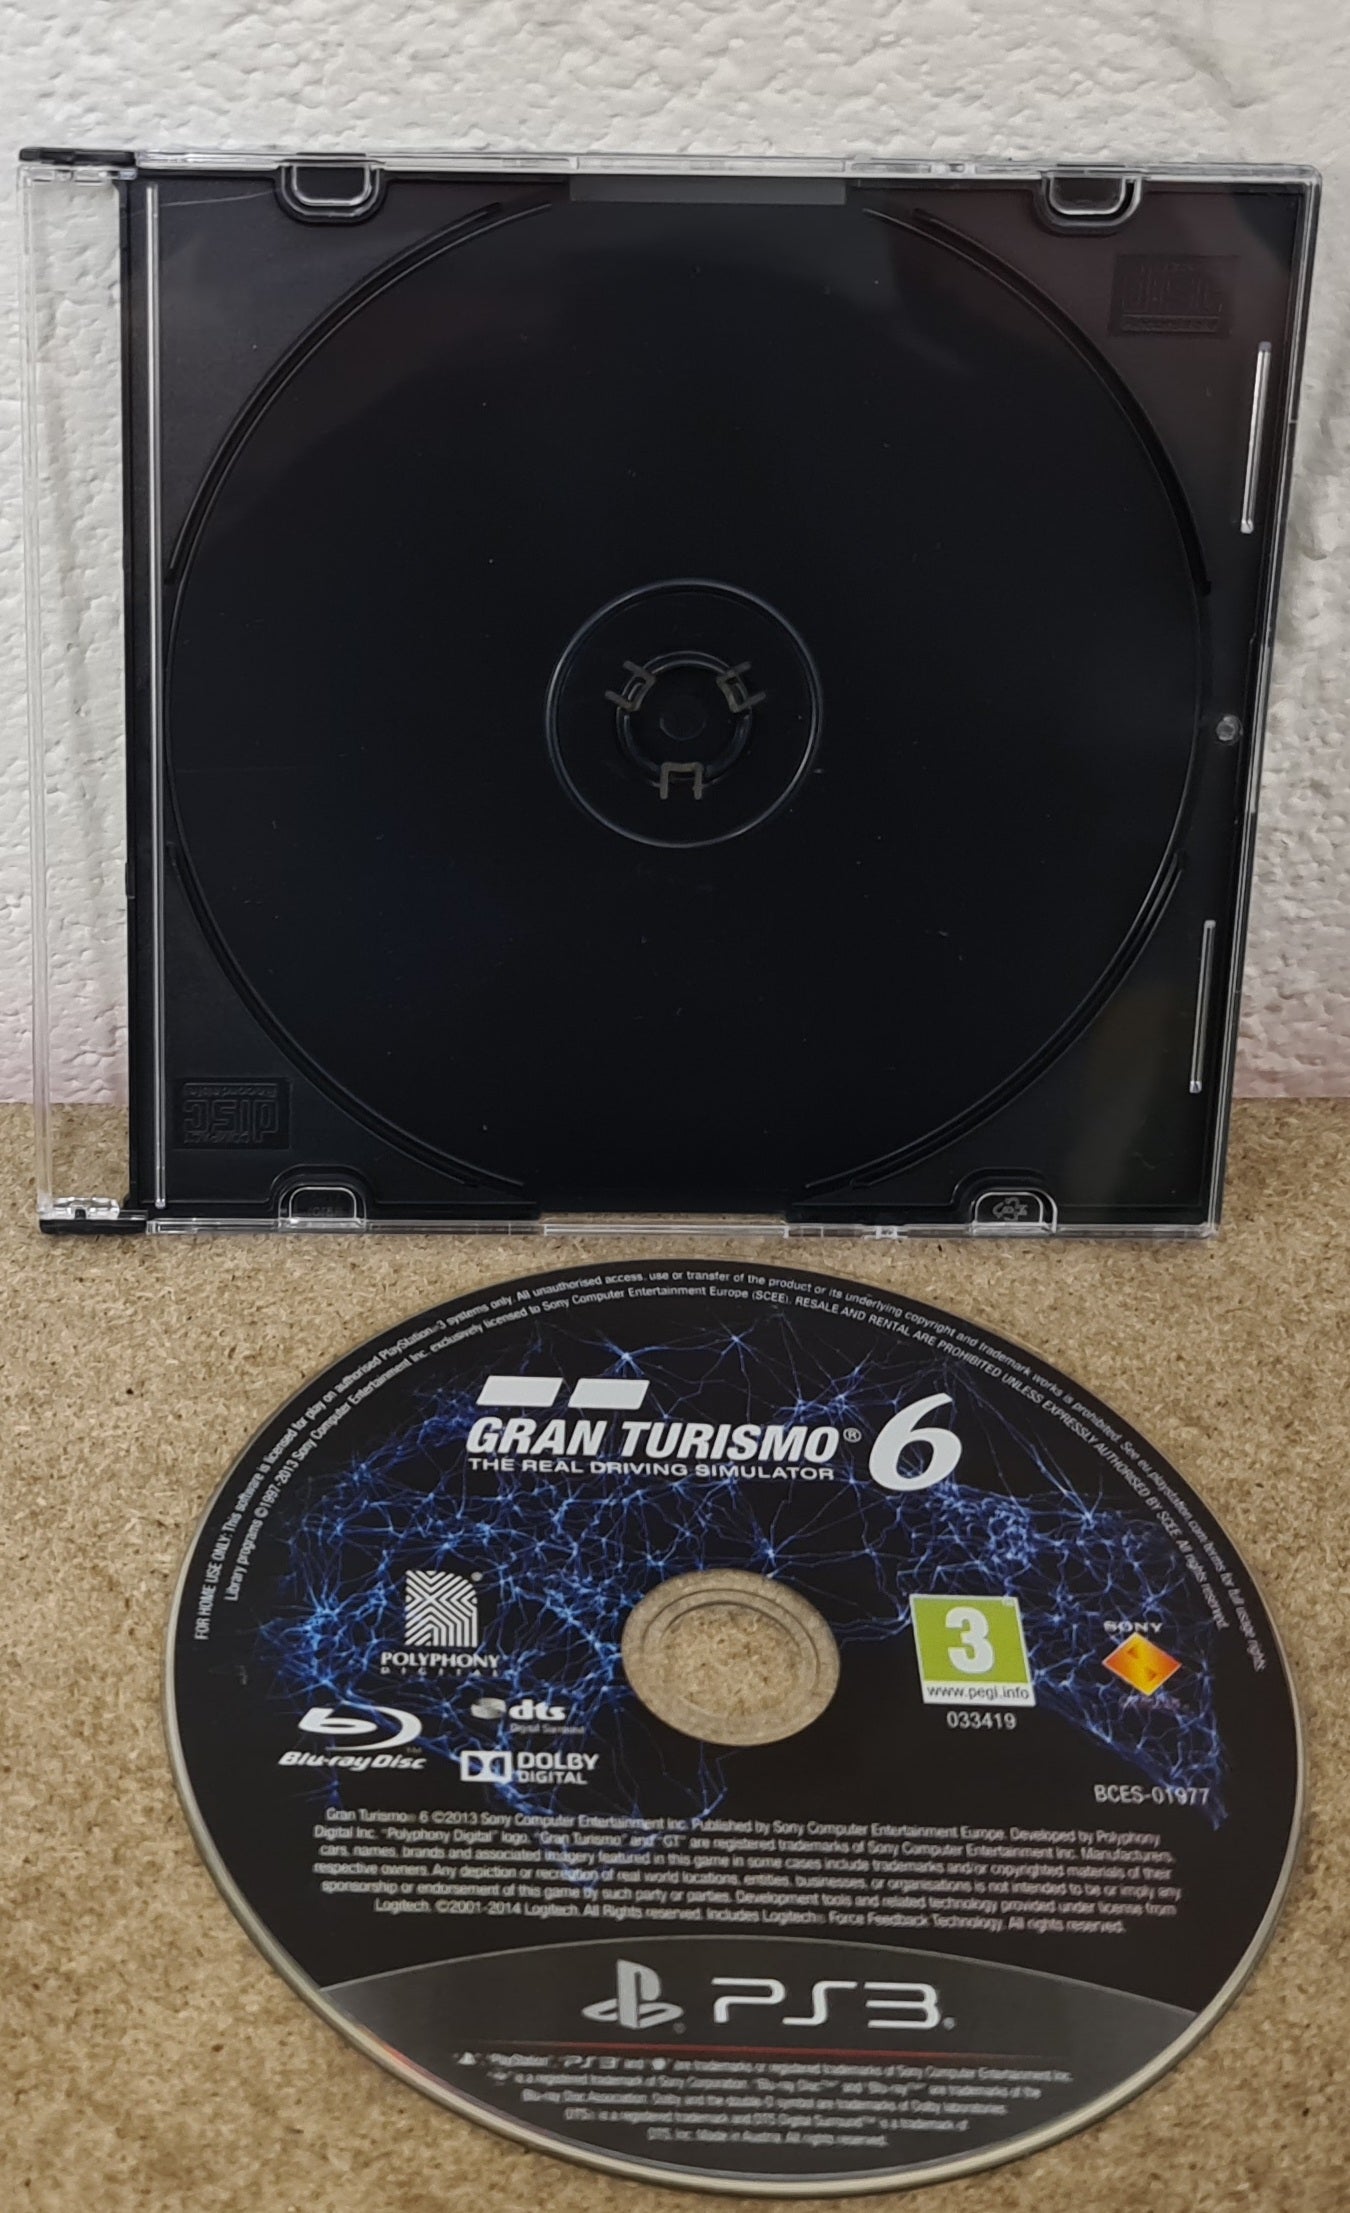 Gran Turismo 6 Sony Playstation 3 (PS3) Game Disc Only